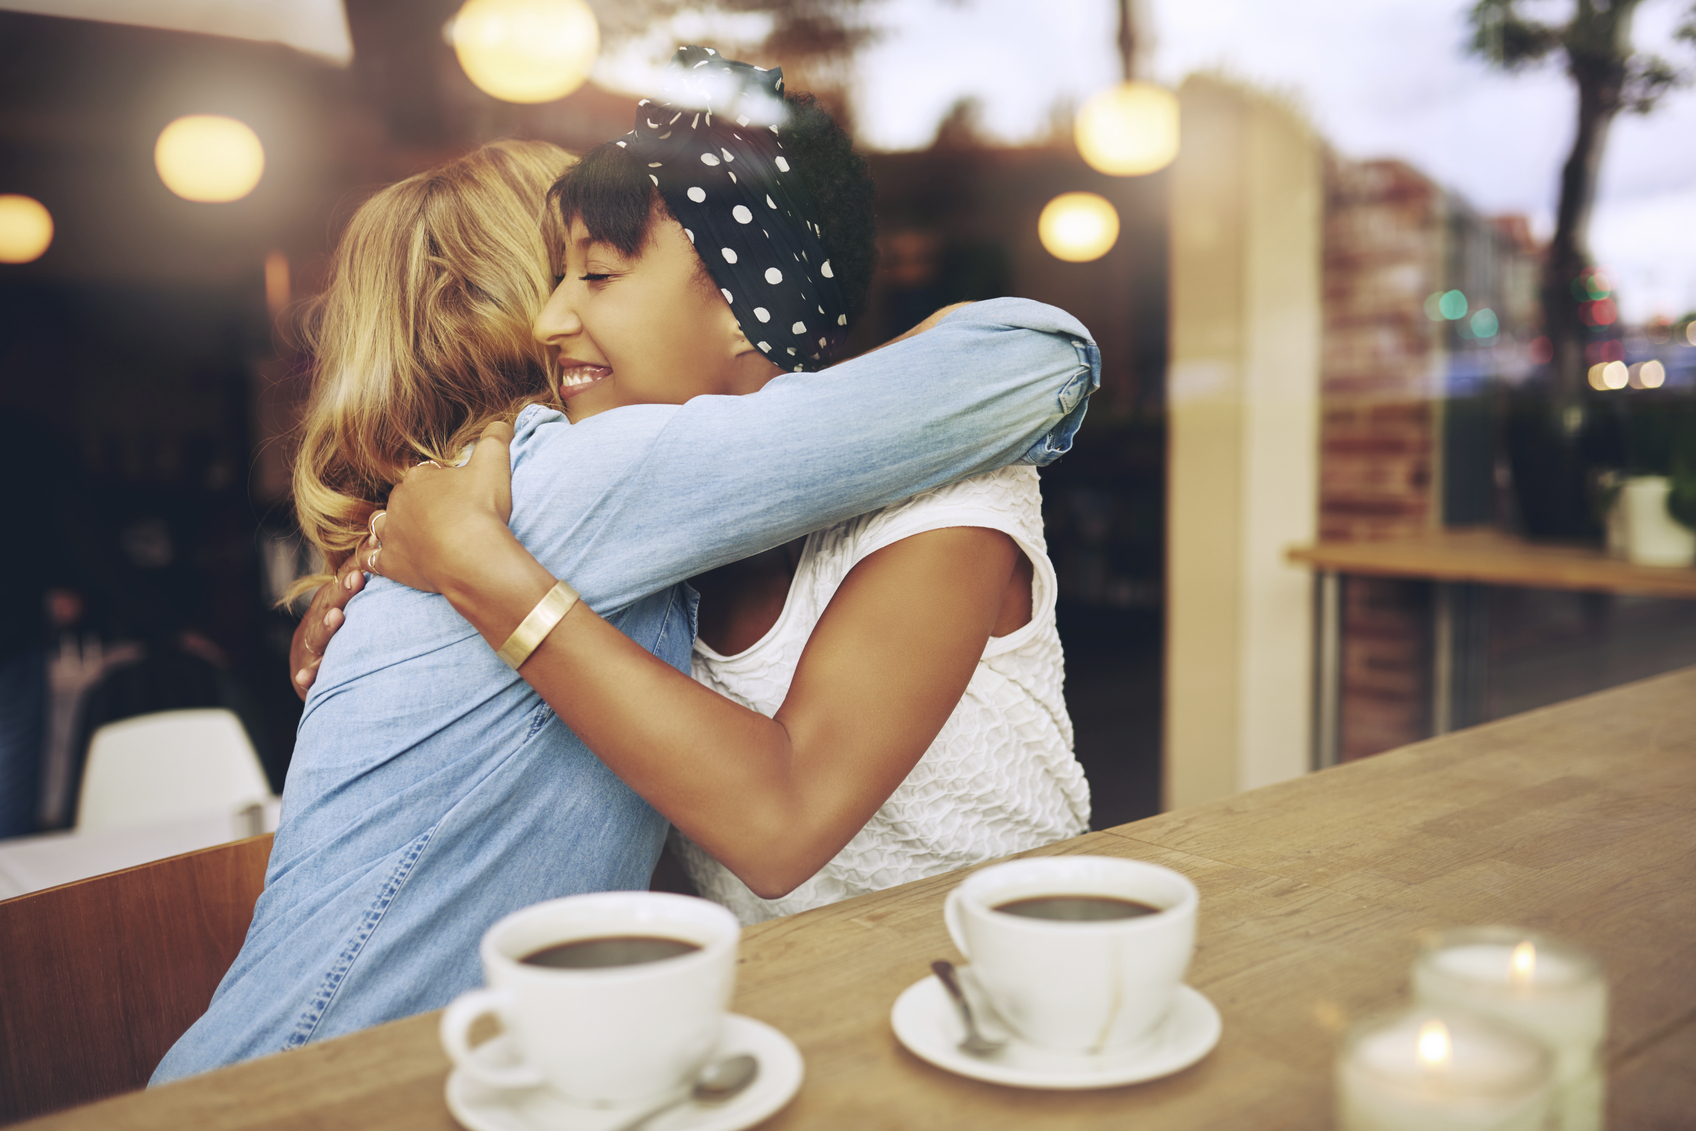 How To Get Involved In A Friend's Life To Strengthen Your Relationship